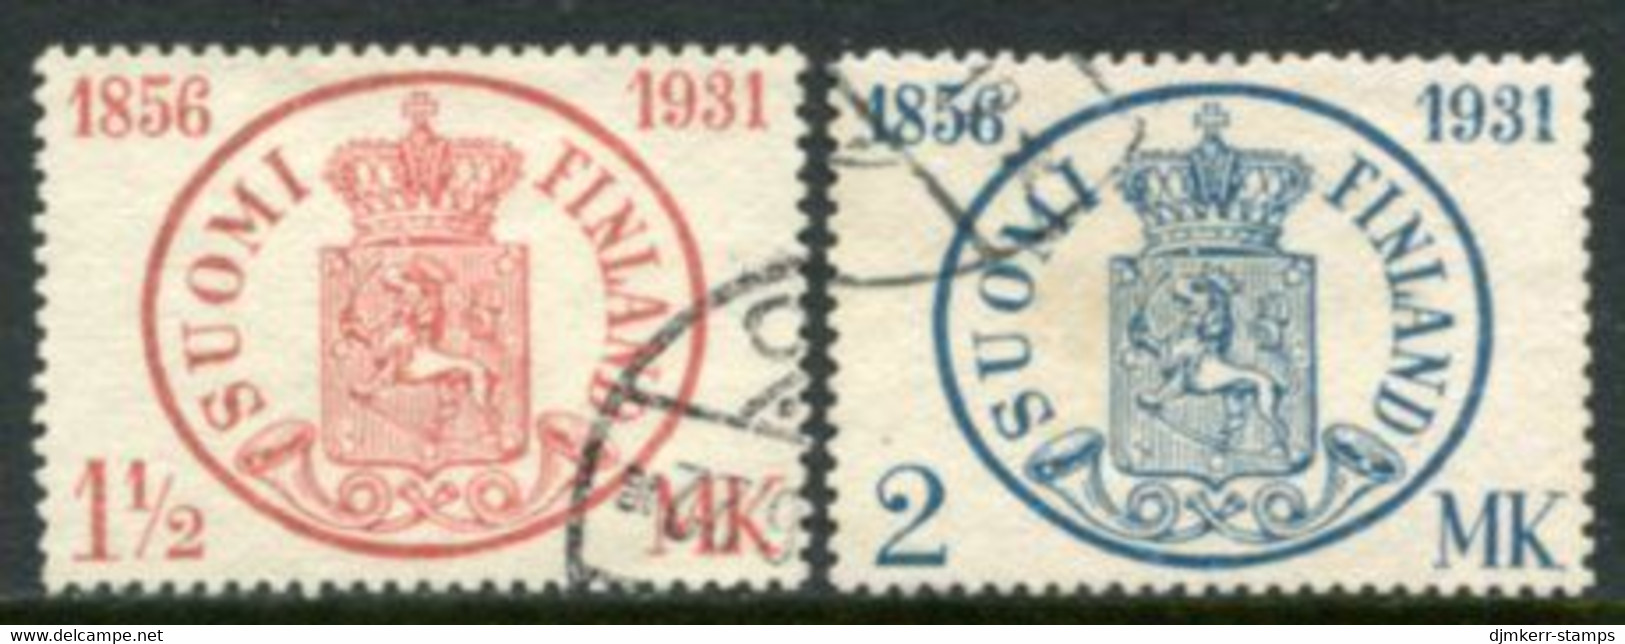 FINLAND 1931 Stamp Anniversary Used.  Michel 167-68 - Usados